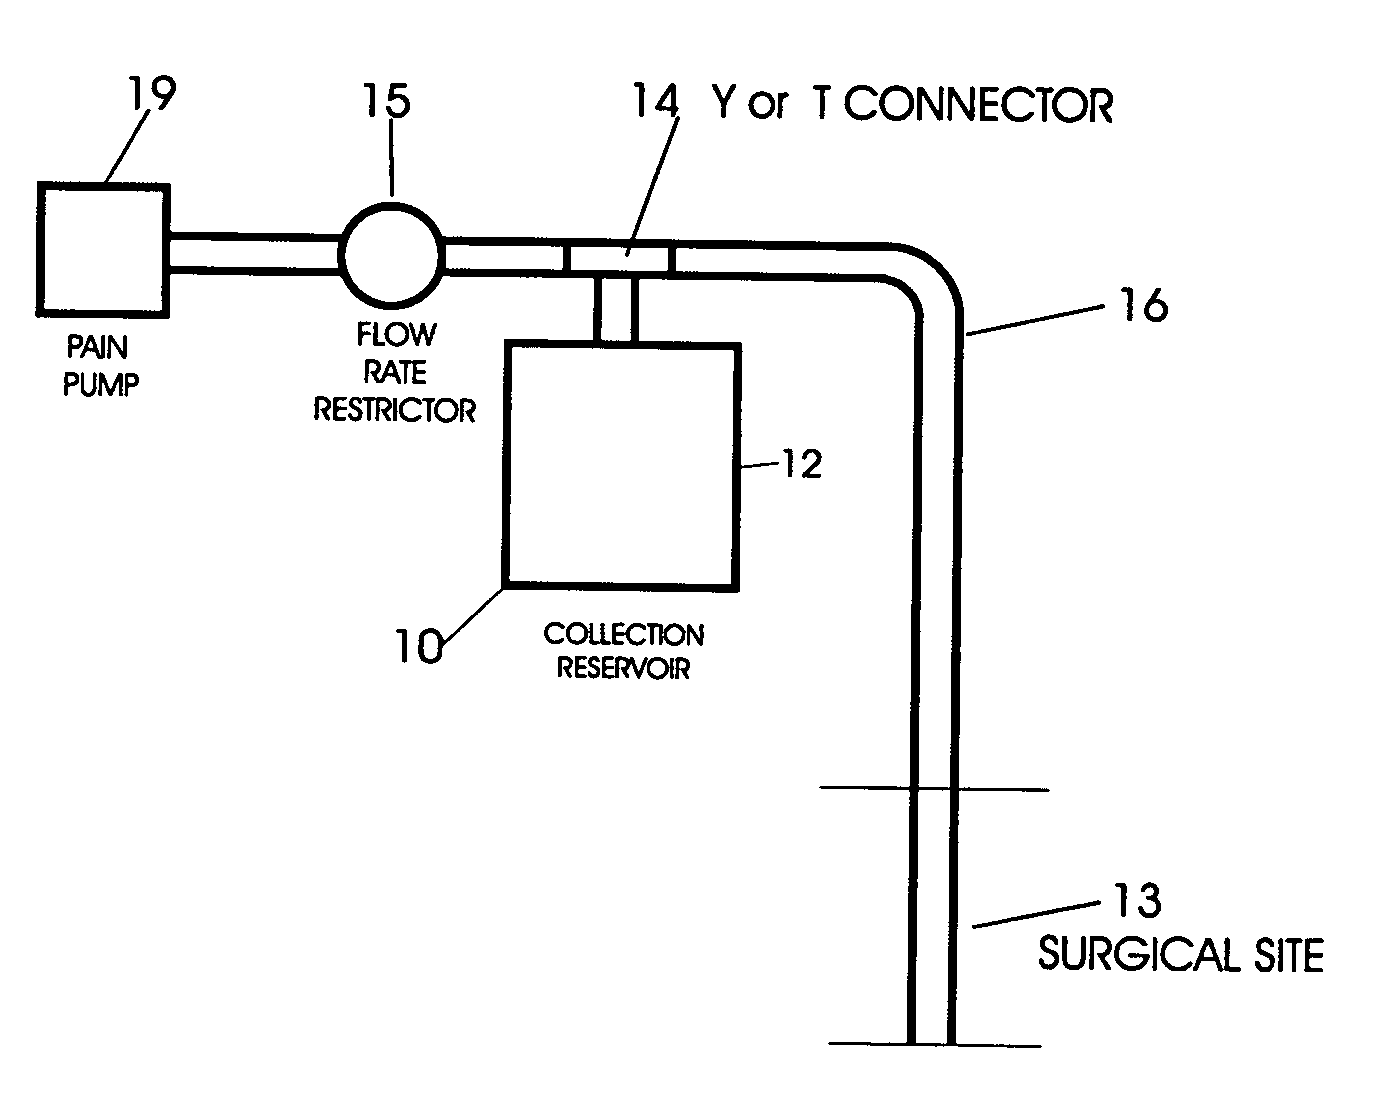 Collection reservoir for an ambulatory pain pump system